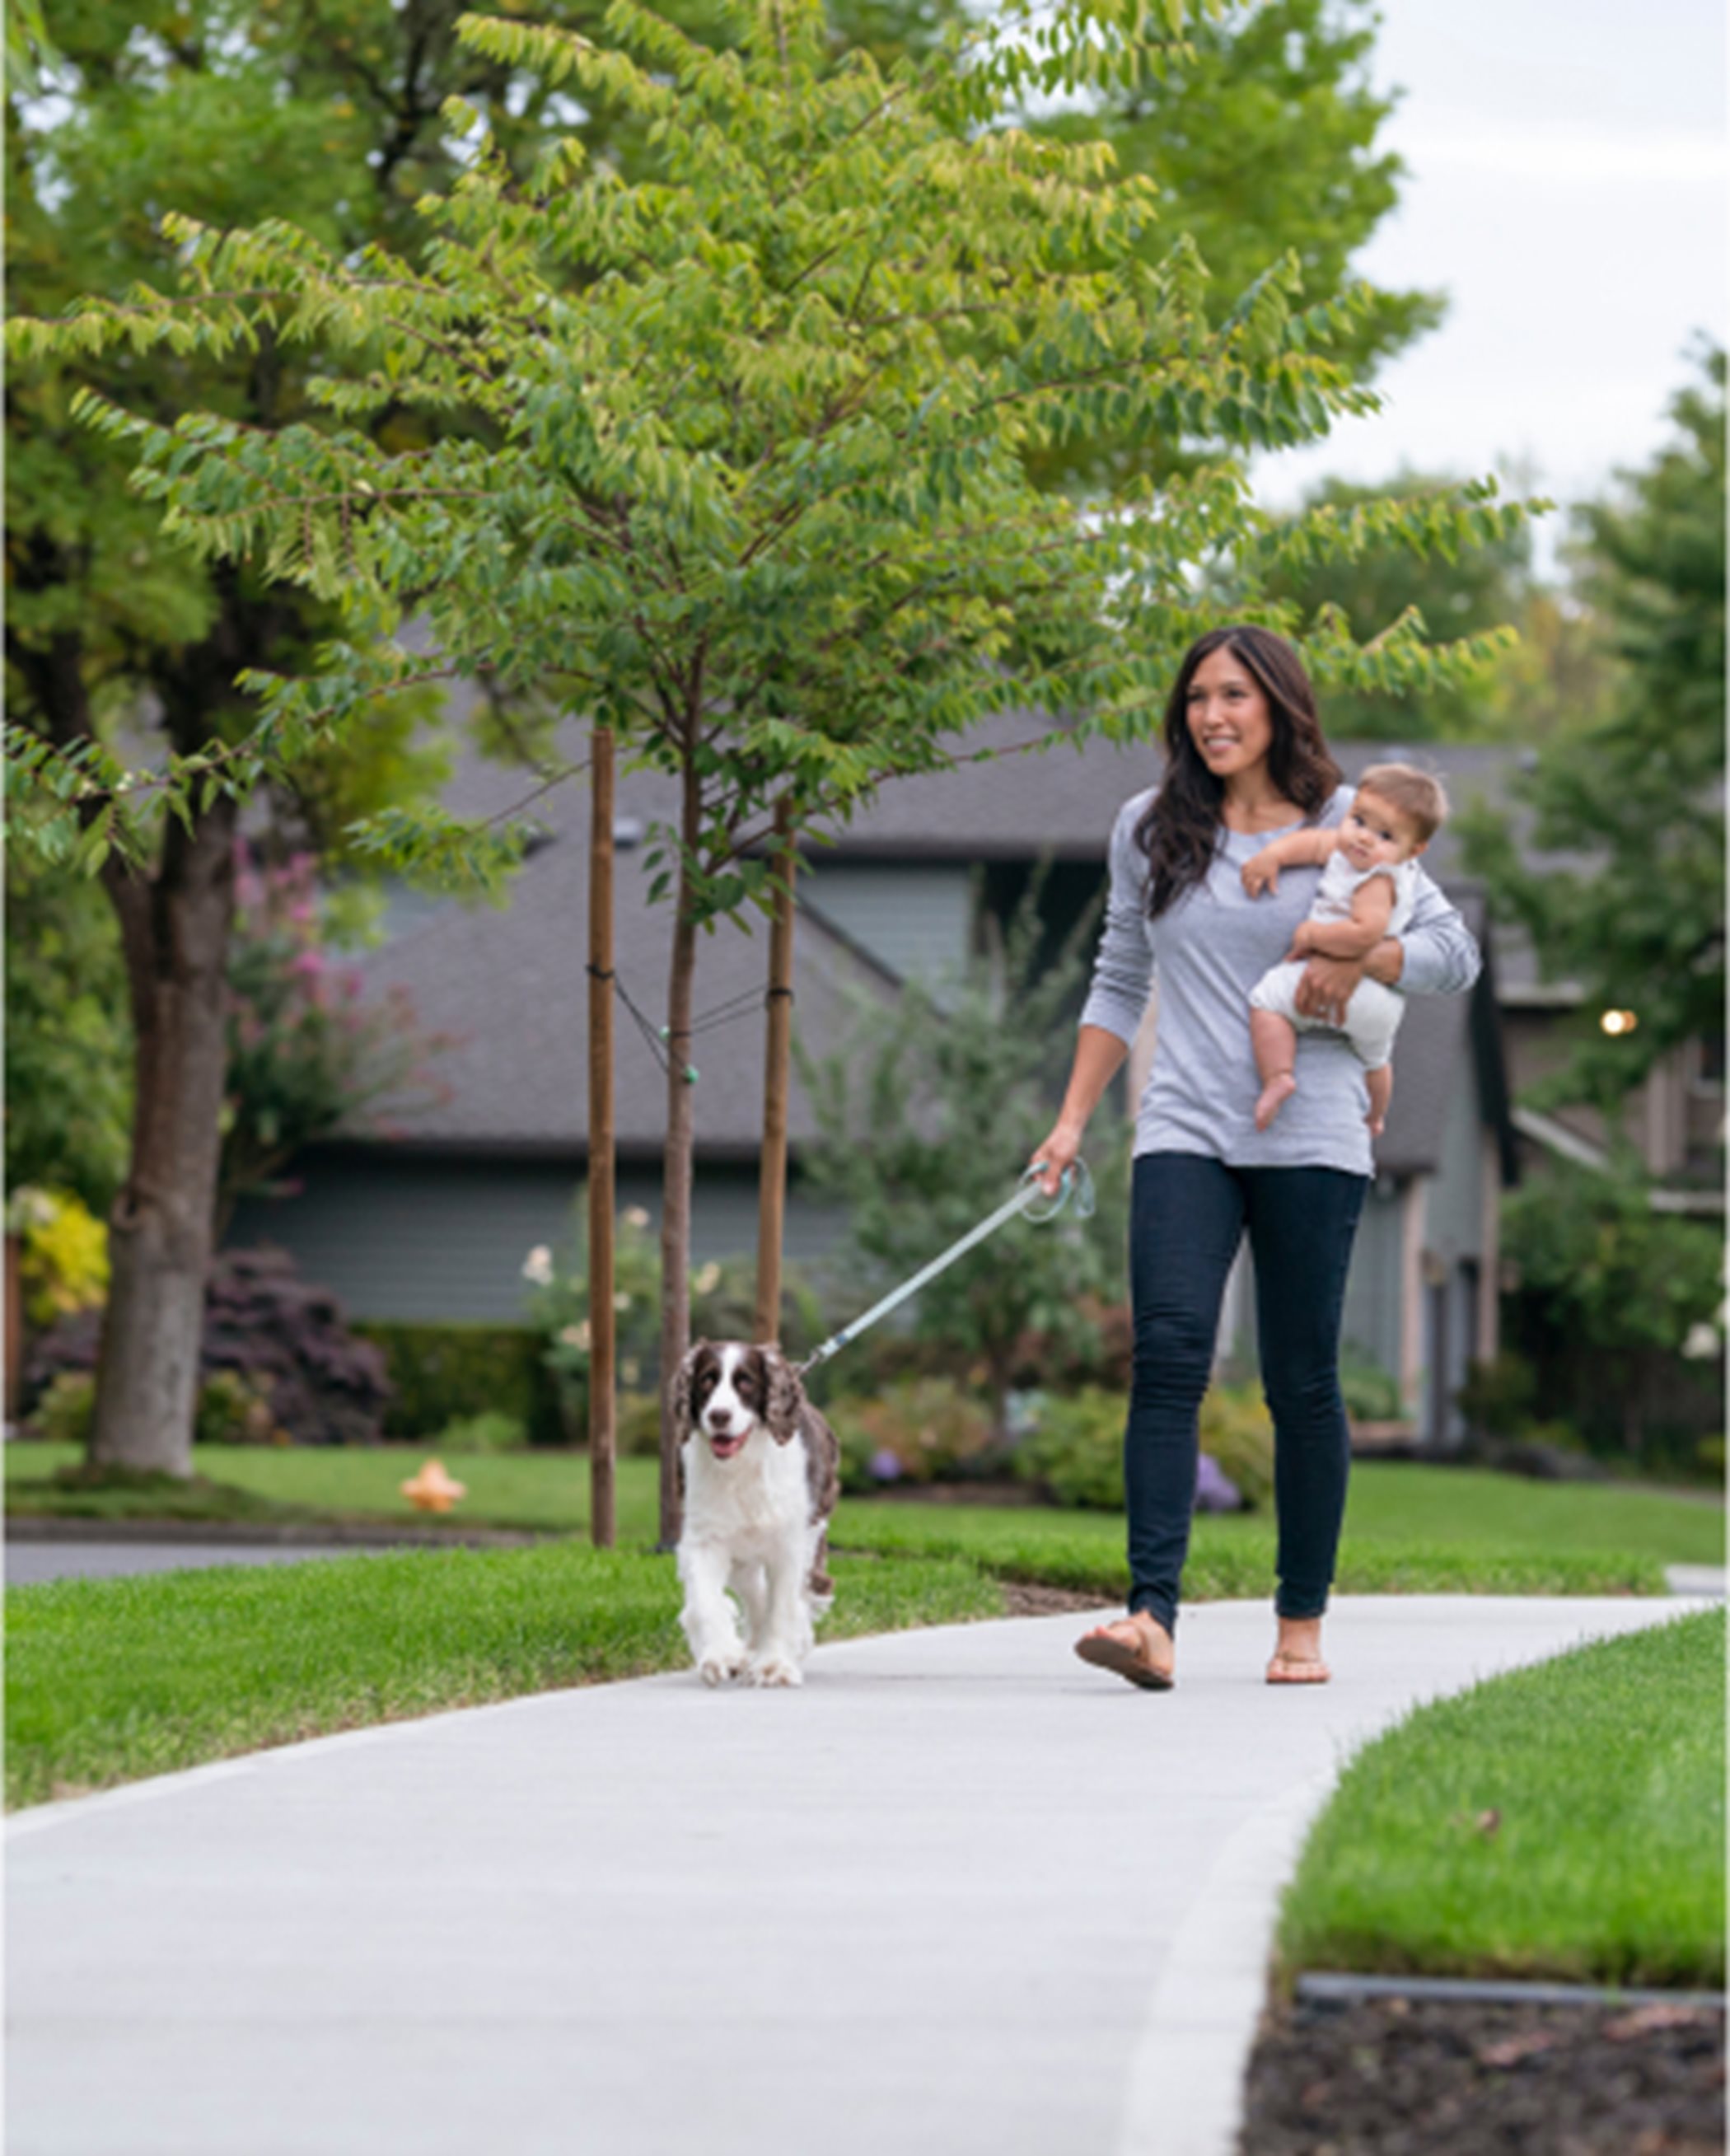 A person with a child walking with a dog